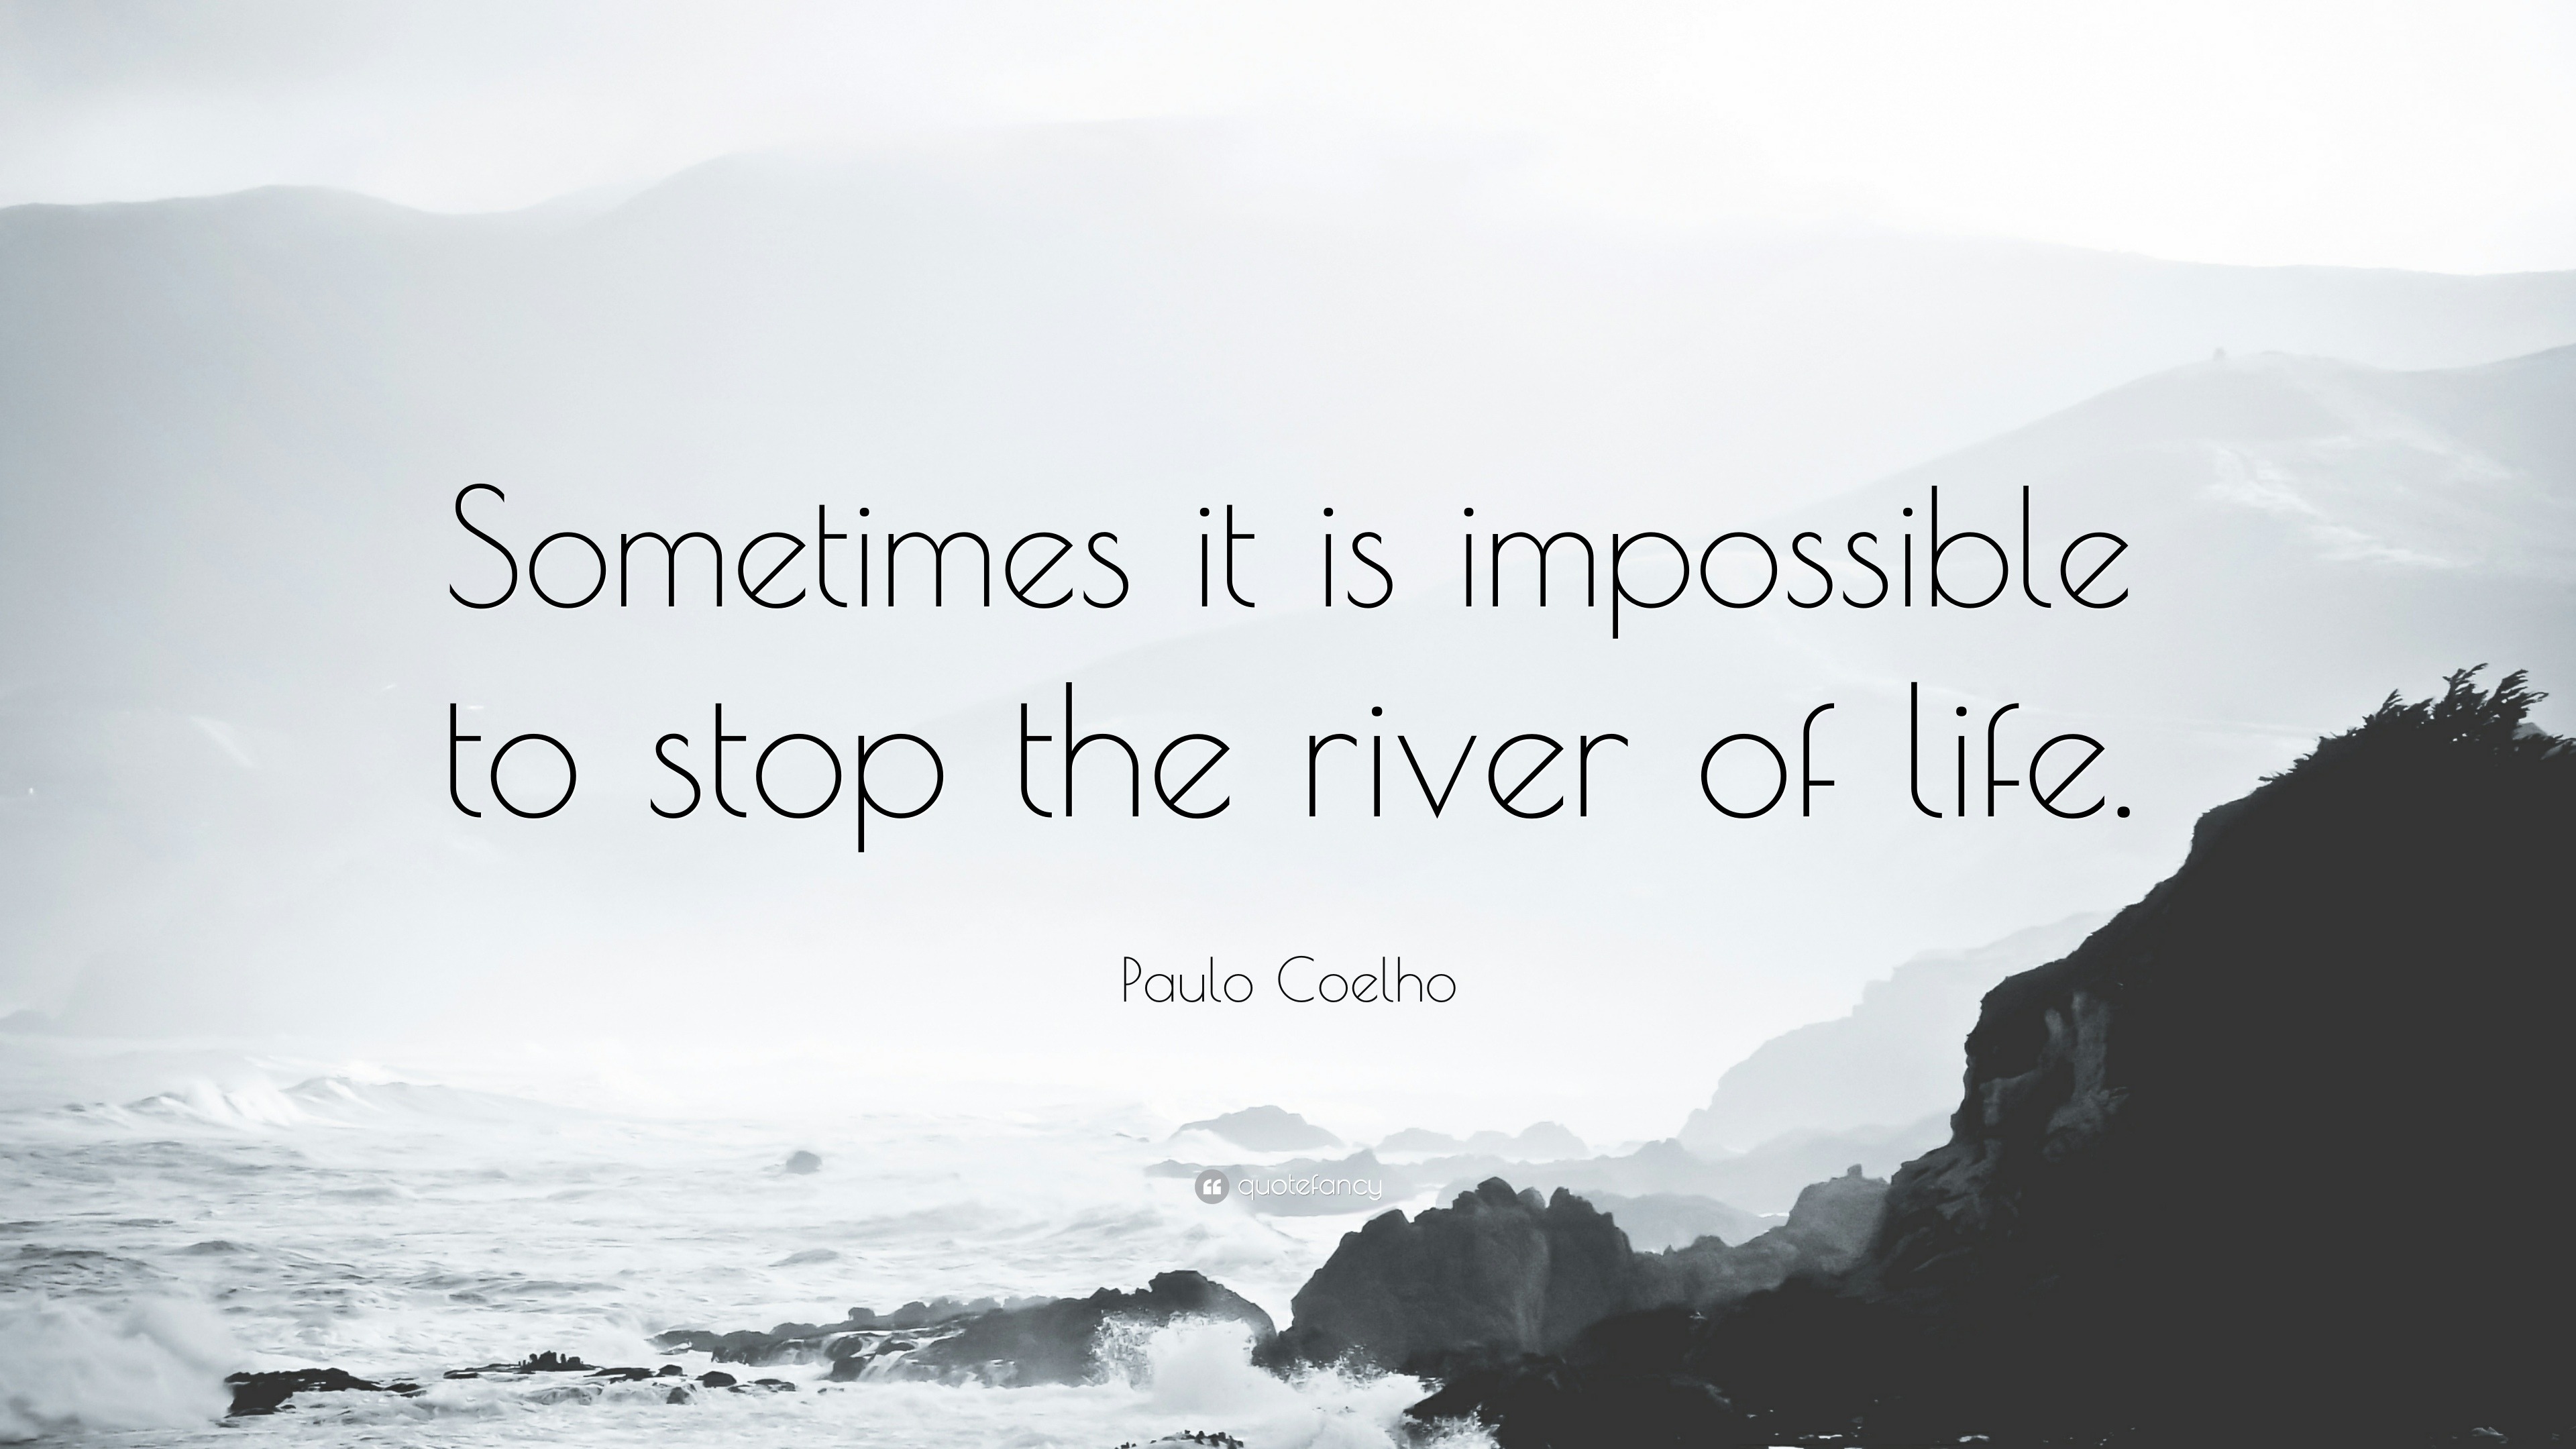 Paulo Coelho Quote “sometimes It Is Impossible To Stop The River Of Life”